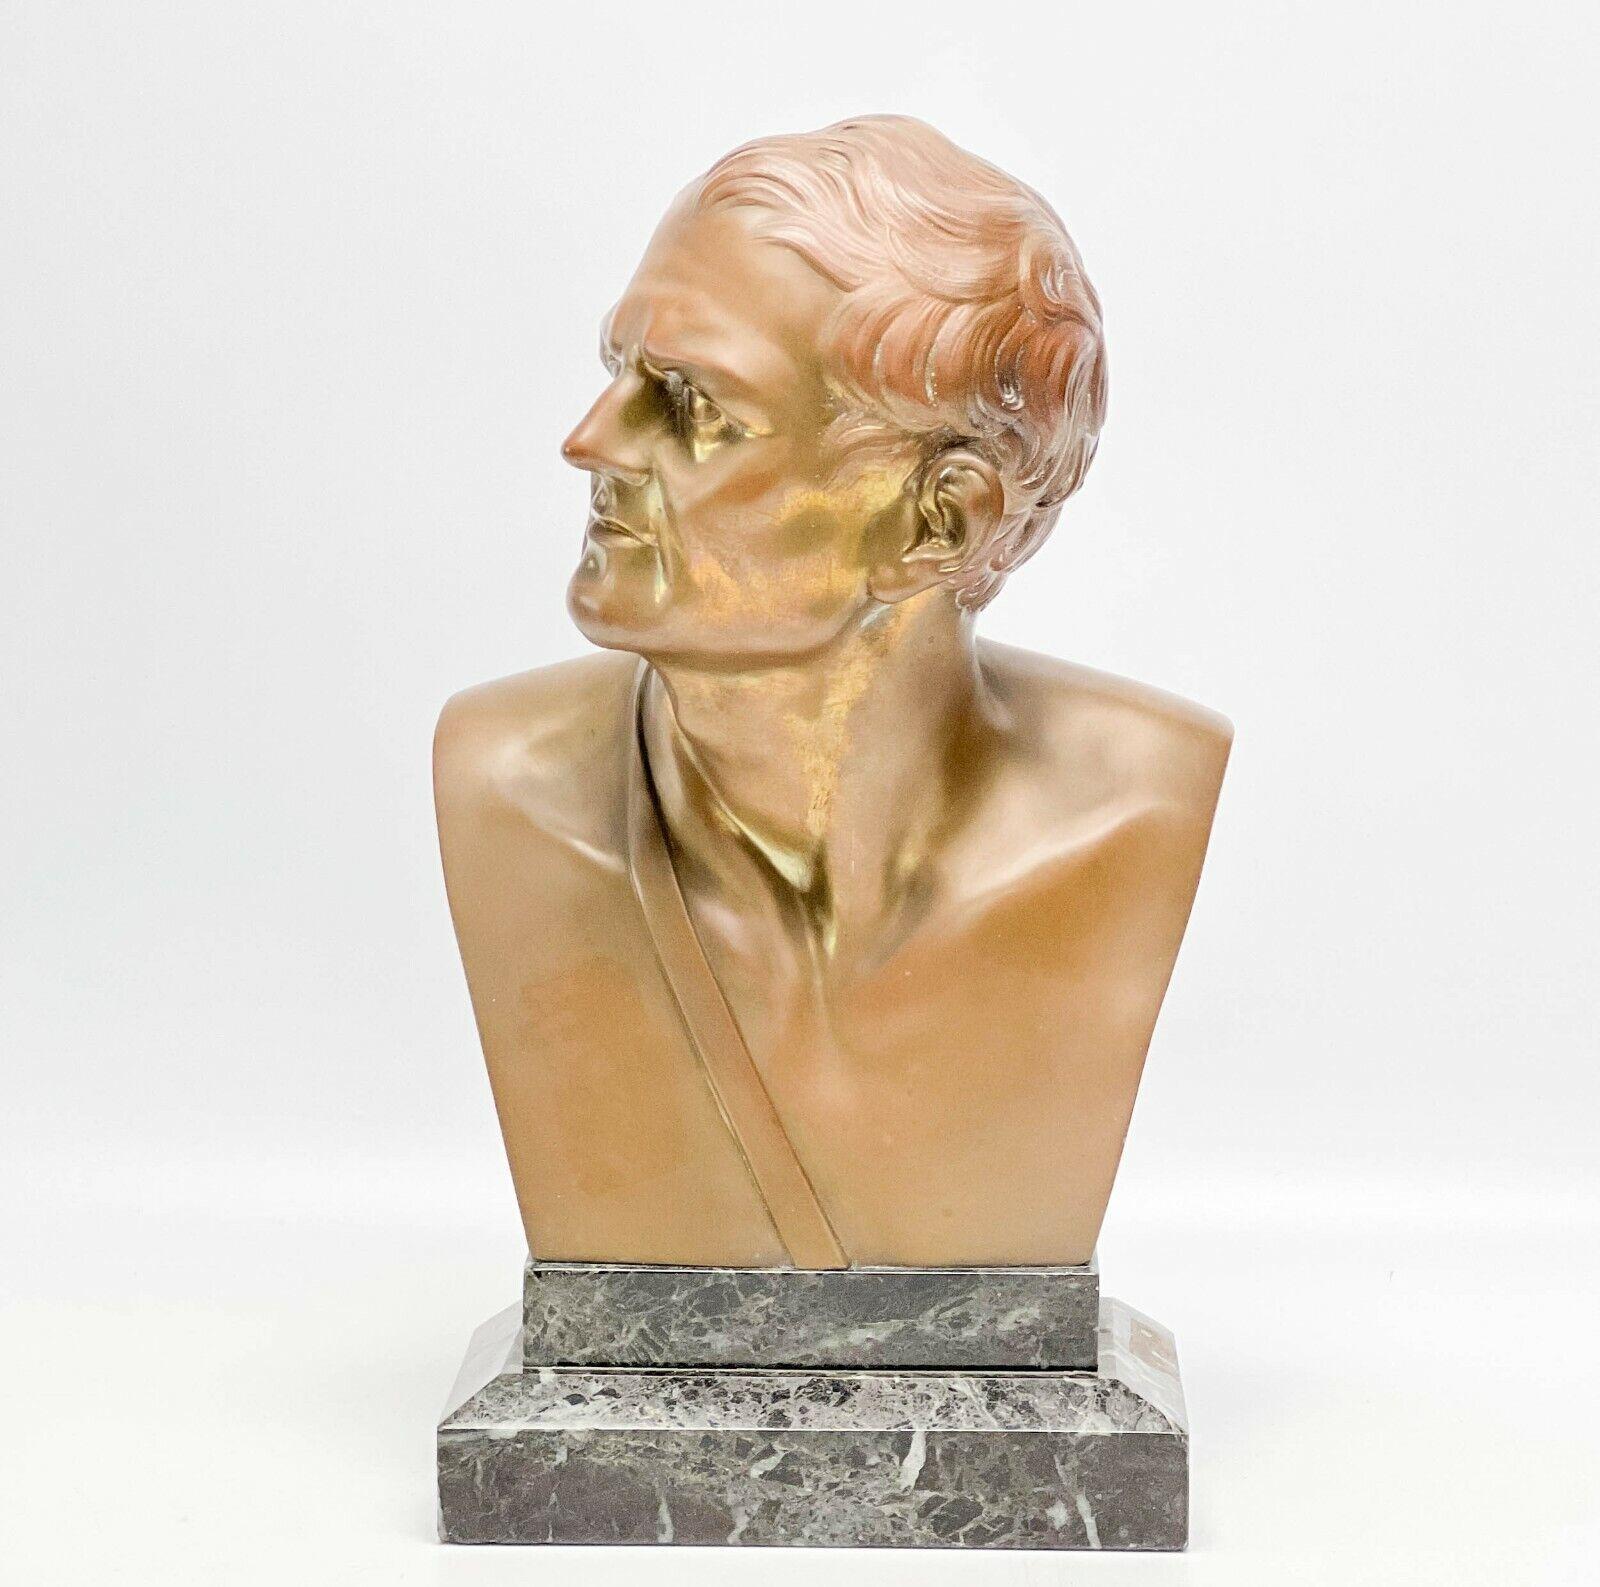 19th century patinated bronze bust of a man, likely a historical figure. Authorized bronze cast by Musee du Louvre. Mounted on a marble base. Inscribed 